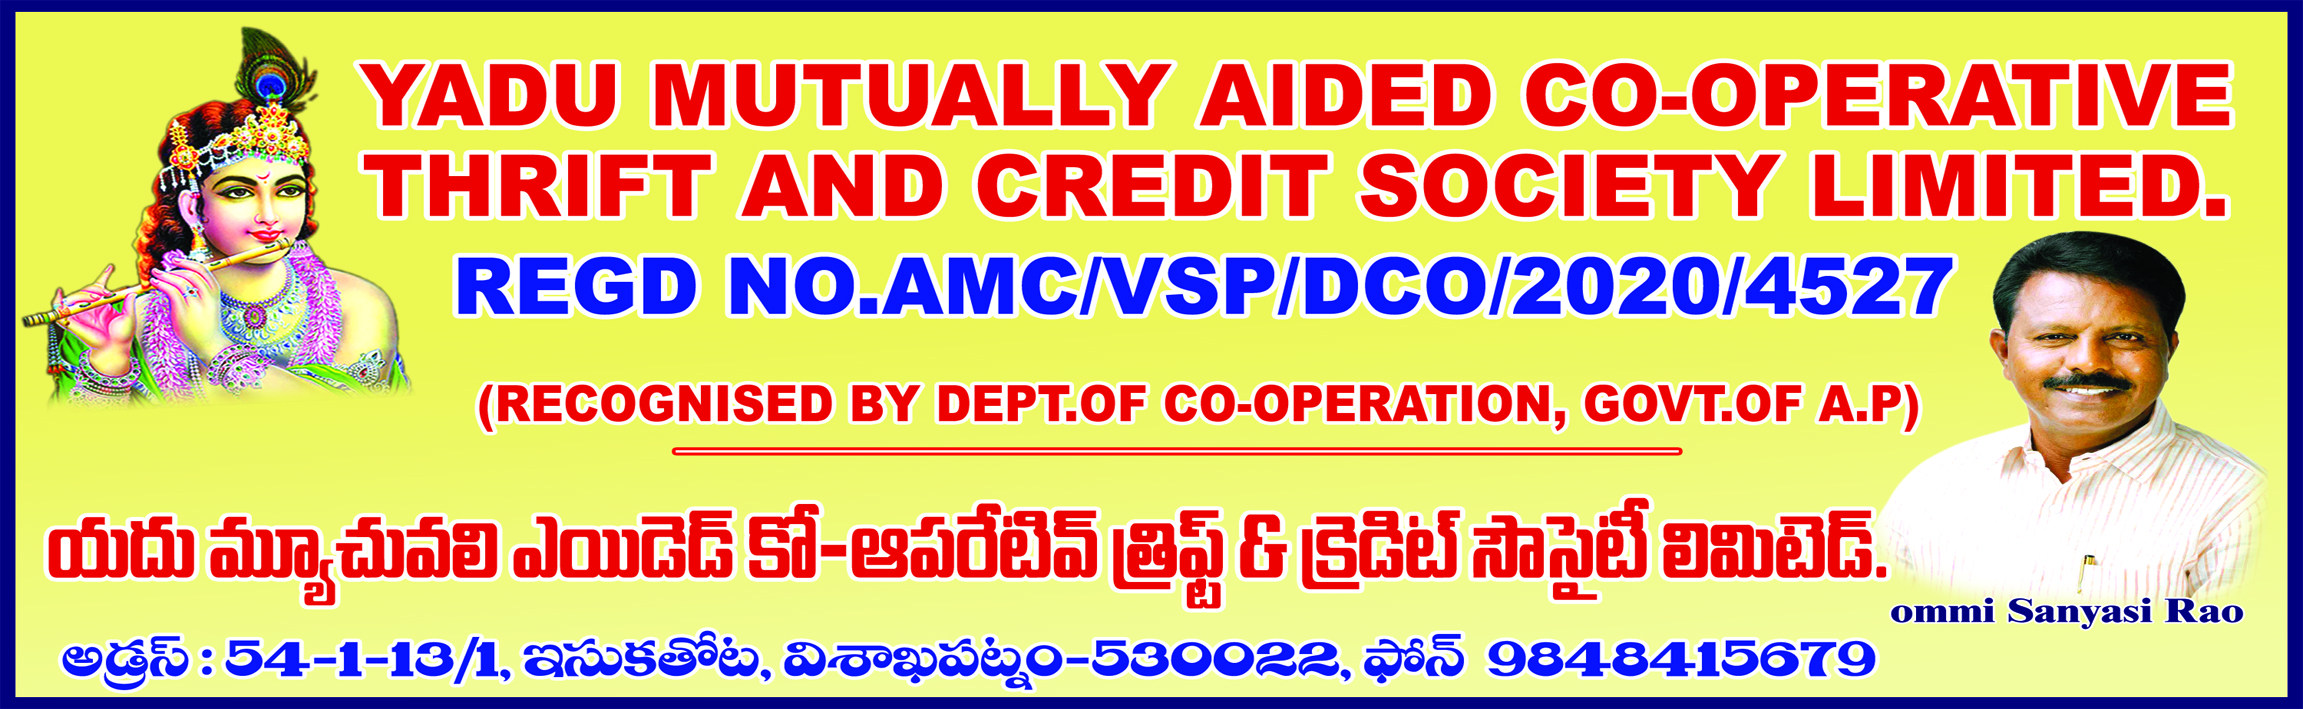 YADU MUTUALLY AIDED CO-OPERATIVE THRIFT AND CREDIT SOCIETY LIMITED